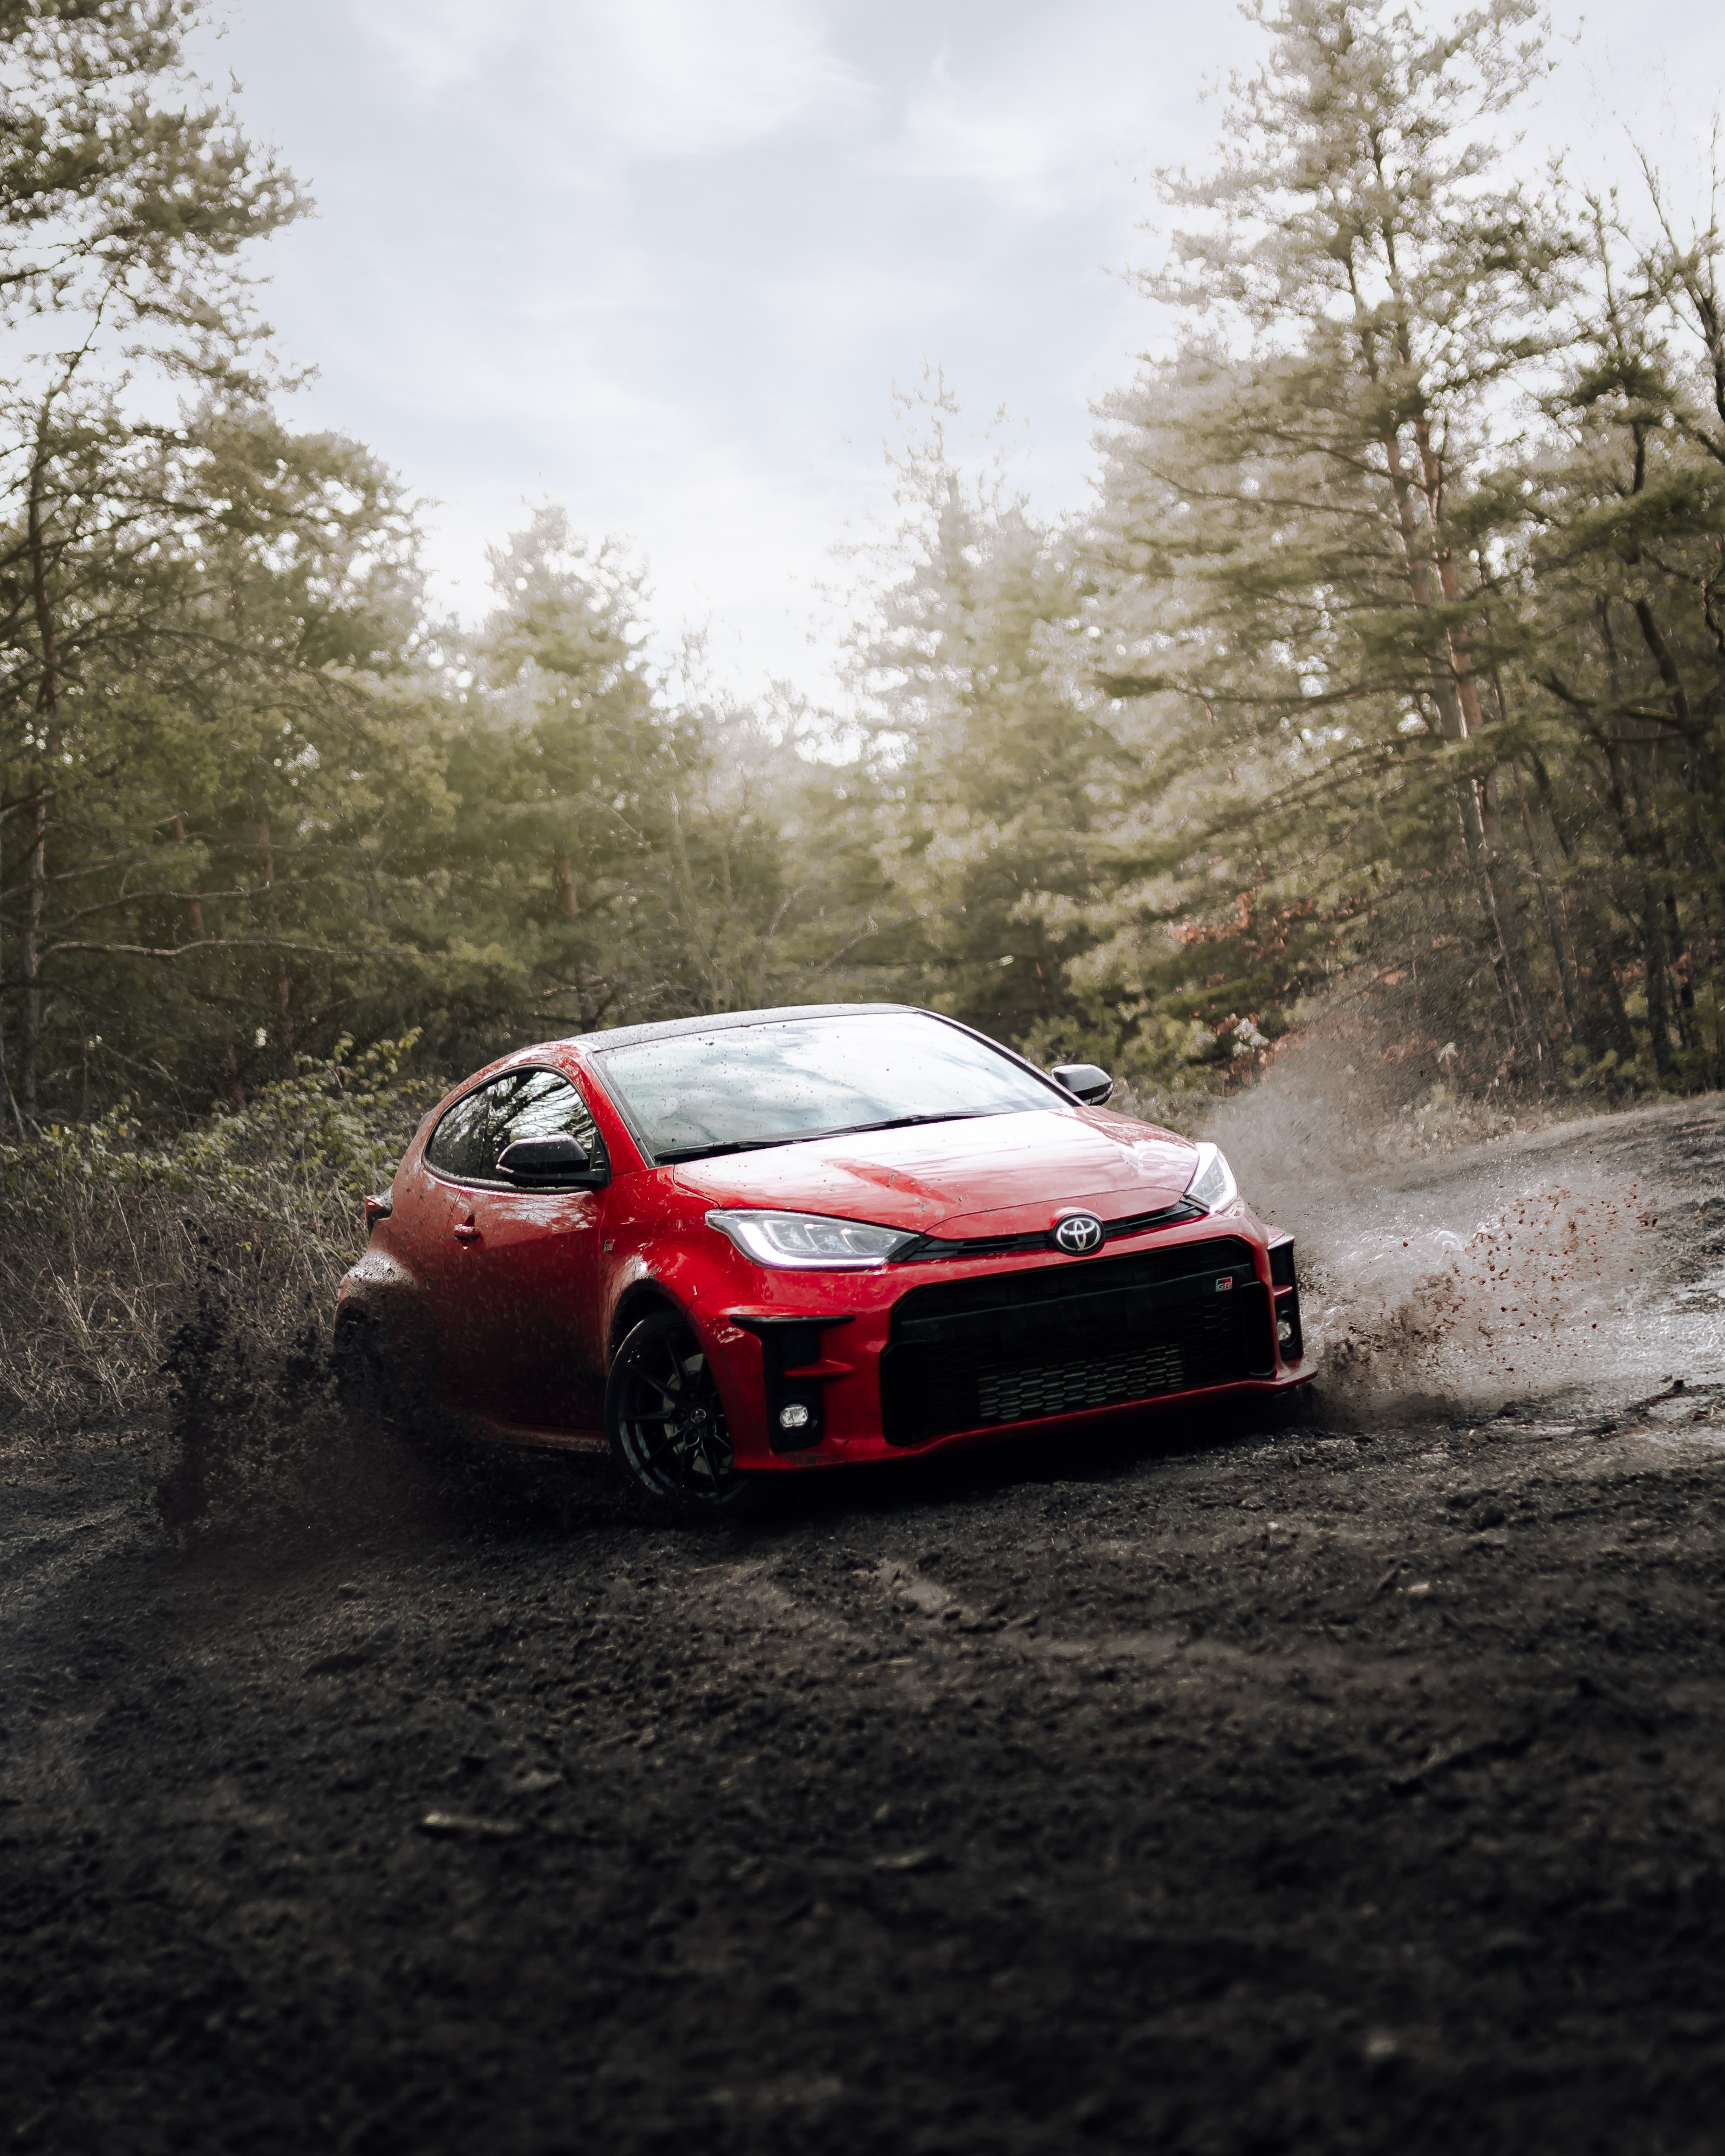 toyota, cars, red, car, spray, puddle download HD wallpaper